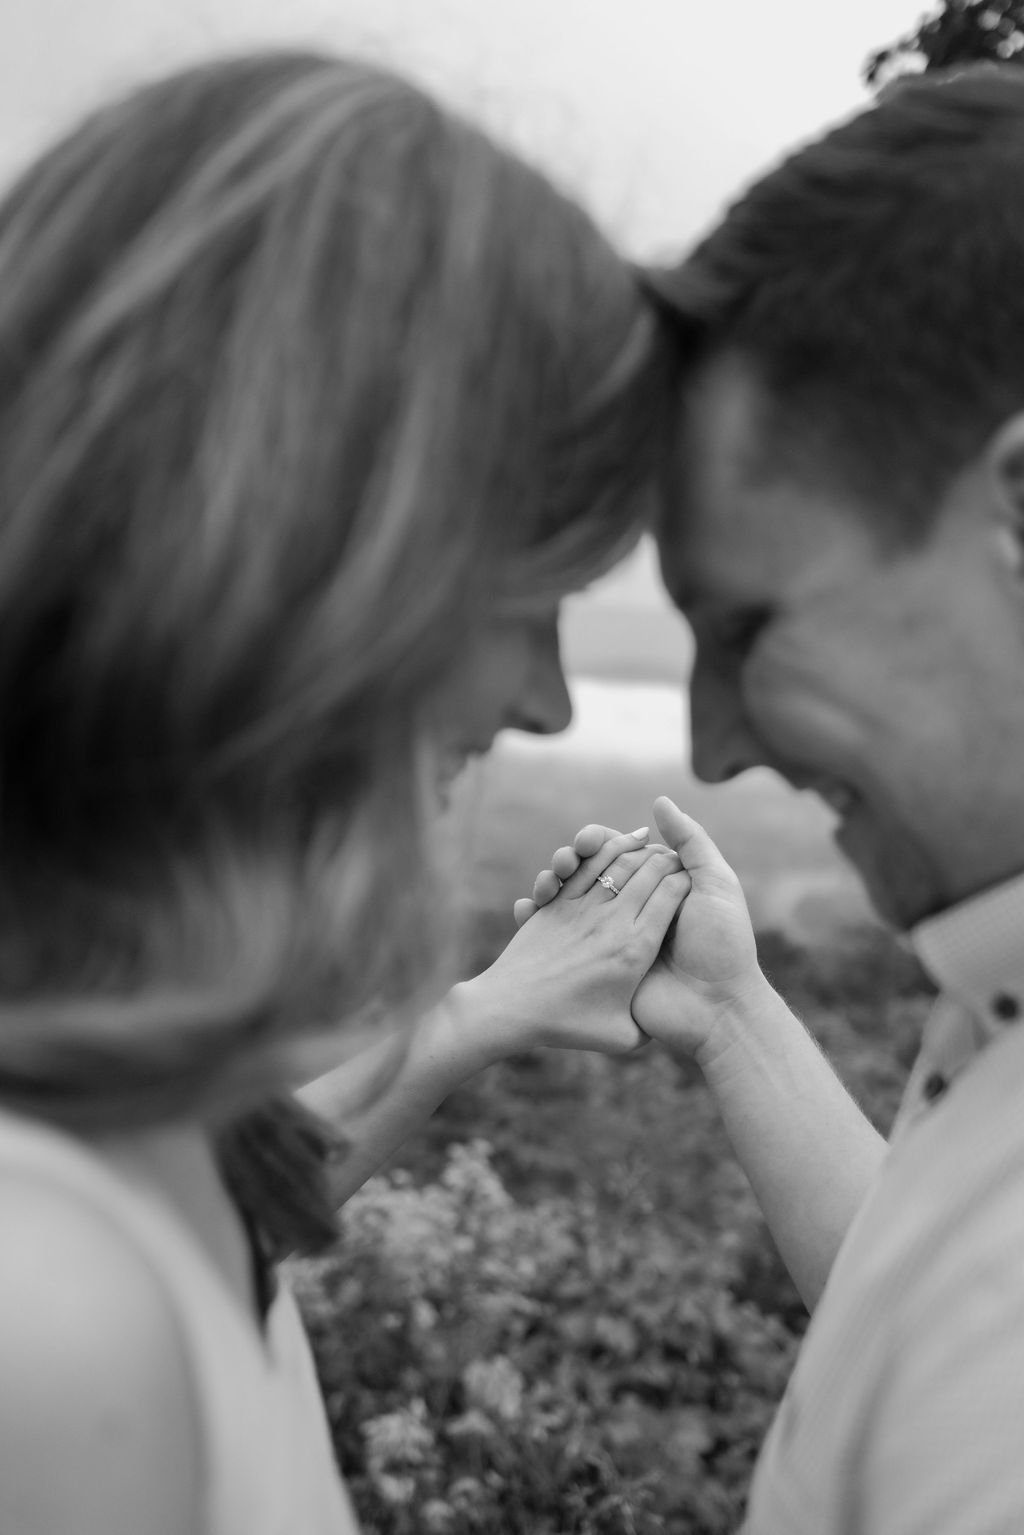 Gatlinburg photographer captures black and white portrait of man and woman forehead's touching with engagement ring as center